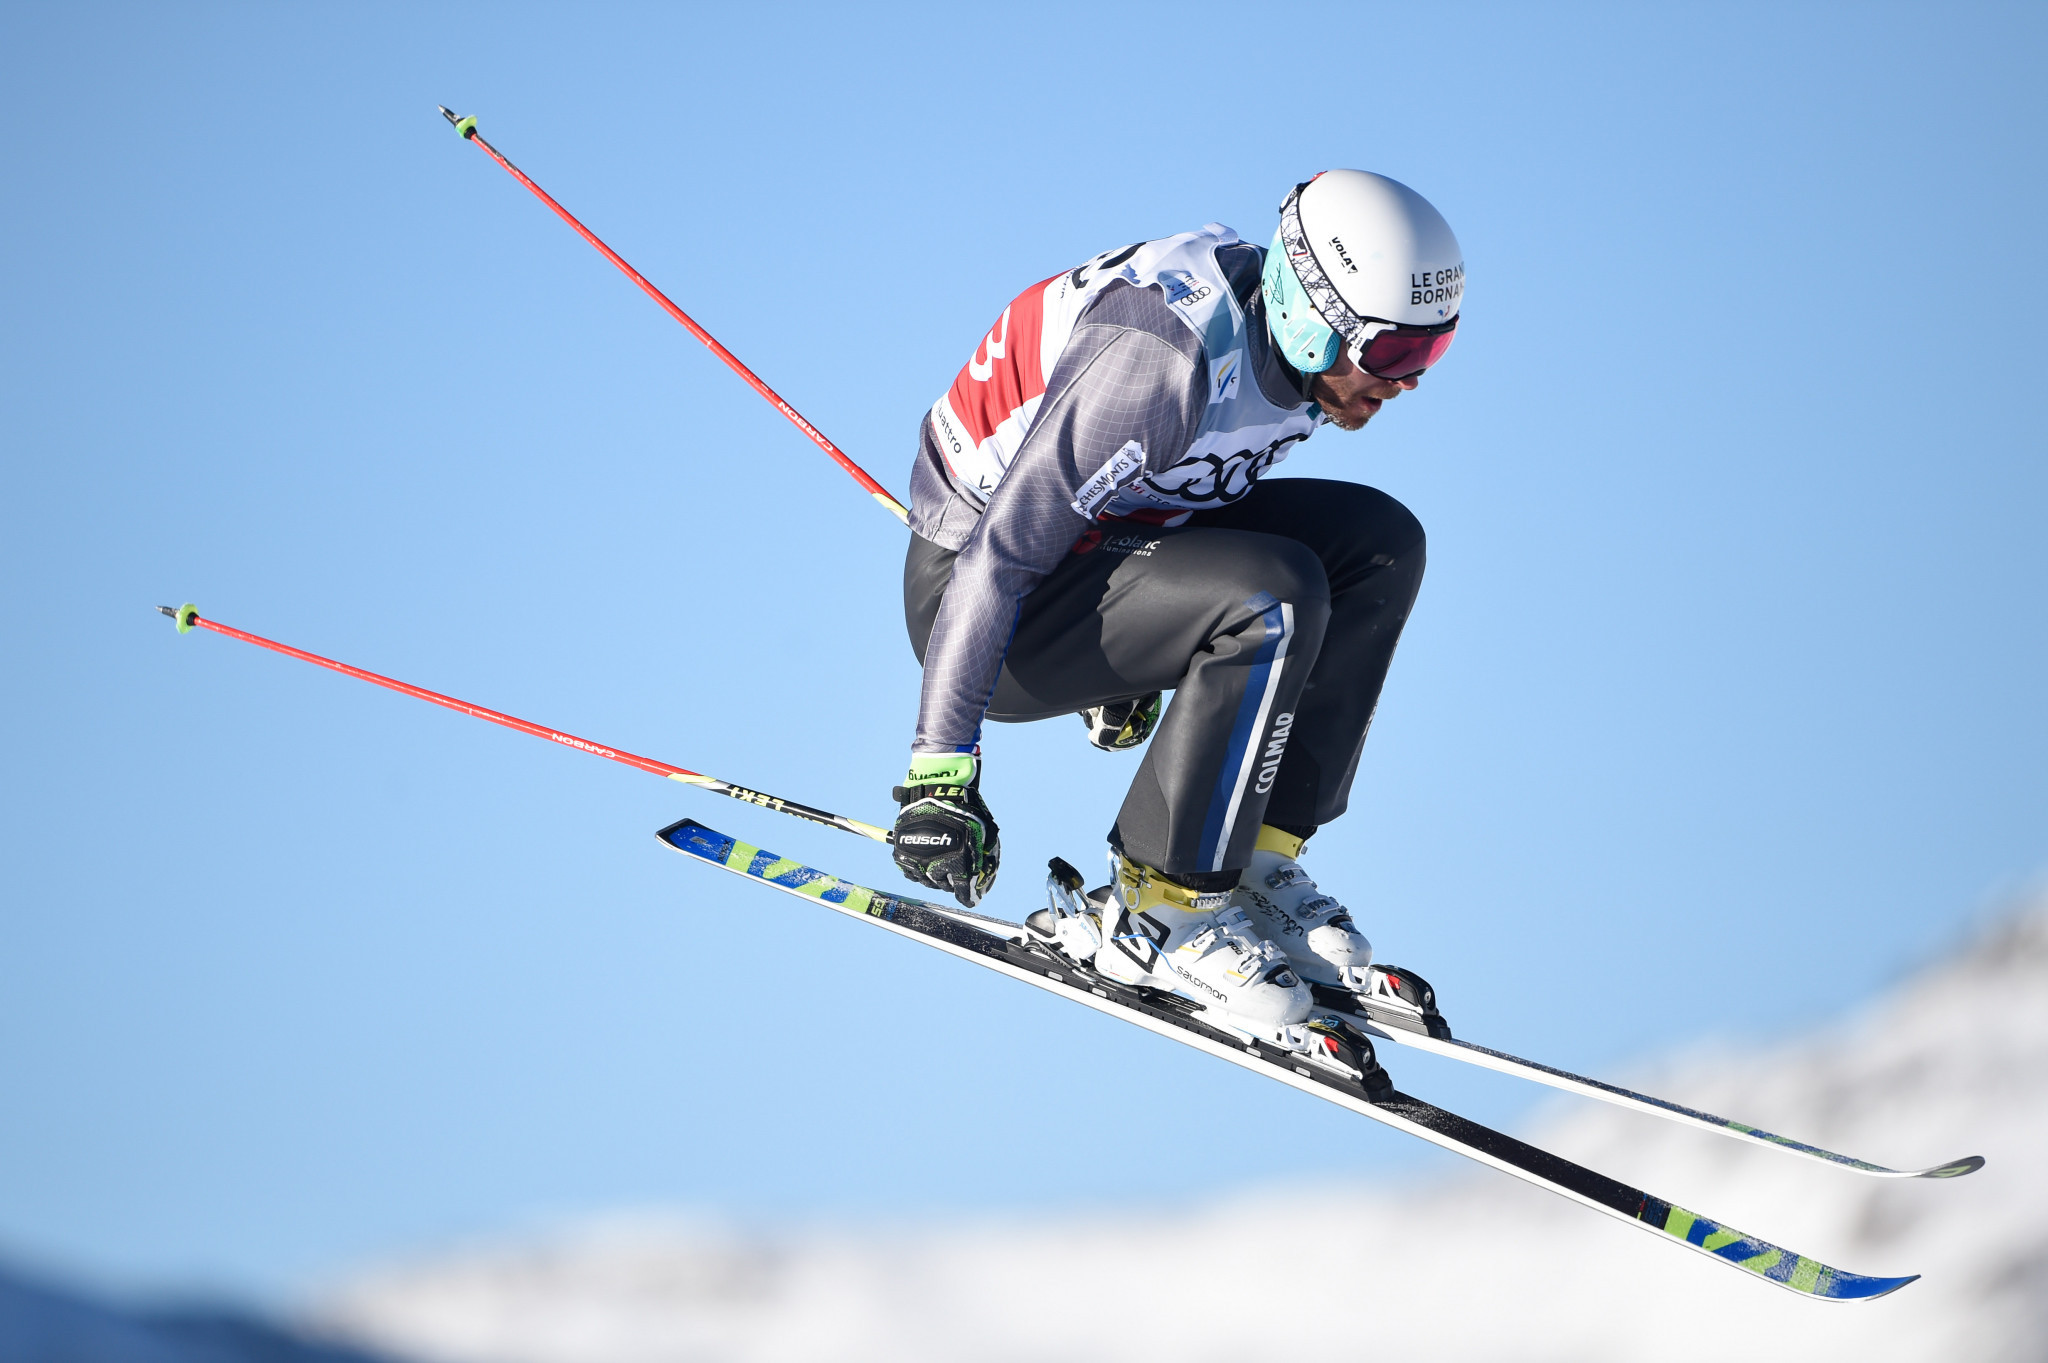 FIS Ski Cross World Cup leader Midol qualifies first in Sunny Valley